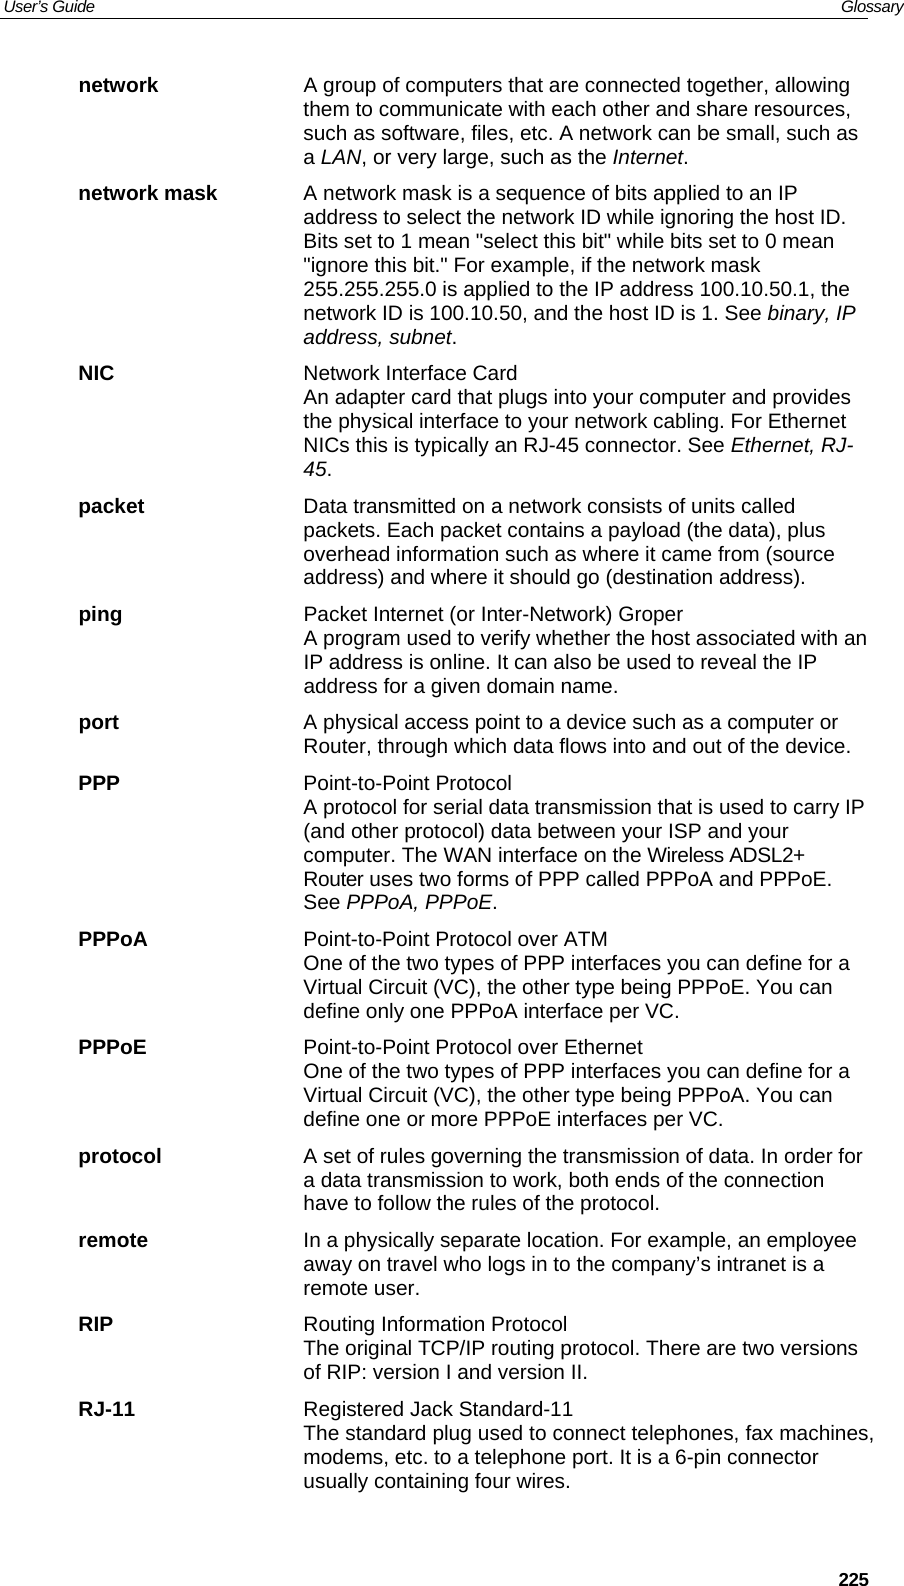 User’s Guide   Glossary  225network  A group of computers that are connected together, allowing them to communicate with each other and share resources, such as software, files, etc. A network can be small, such as a LAN, or very large, such as the Internet. network mask  A network mask is a sequence of bits applied to an IP address to select the network ID while ignoring the host ID. Bits set to 1 mean &quot;select this bit&quot; while bits set to 0 mean &quot;ignore this bit.&quot; For example, if the network mask 255.255.255.0 is applied to the IP address 100.10.50.1, the network ID is 100.10.50, and the host ID is 1. See binary, IP address, subnet. NIC  Network Interface Card An adapter card that plugs into your computer and provides the physical interface to your network cabling. For Ethernet NICs this is typically an RJ-45 connector. See Ethernet, RJ-45. packet  Data transmitted on a network consists of units called packets. Each packet contains a payload (the data), plus overhead information such as where it came from (source address) and where it should go (destination address). ping  Packet Internet (or Inter-Network) Groper A program used to verify whether the host associated with an IP address is online. It can also be used to reveal the IP address for a given domain name.  port  A physical access point to a device such as a computer or Router, through which data flows into and out of the device. PPP Point-to-Point Protocol A protocol for serial data transmission that is used to carry IP (and other protocol) data between your ISP and your computer. The WAN interface on the Wireless ADSL2+ Router uses two forms of PPP called PPPoA and PPPoE. See PPPoA, PPPoE. PPPoA  Point-to-Point Protocol over ATM One of the two types of PPP interfaces you can define for a Virtual Circuit (VC), the other type being PPPoE. You can define only one PPPoA interface per VC. PPPoE  Point-to-Point Protocol over Ethernet One of the two types of PPP interfaces you can define for a Virtual Circuit (VC), the other type being PPPoA. You can define one or more PPPoE interfaces per VC. protocol  A set of rules governing the transmission of data. In order for a data transmission to work, both ends of the connection have to follow the rules of the protocol. remote  In a physically separate location. For example, an employee away on travel who logs in to the company’s intranet is a remote user. RIP  Routing Information Protocol The original TCP/IP routing protocol. There are two versions of RIP: version I and version II.  RJ-11  Registered Jack Standard-11 The standard plug used to connect telephones, fax machines, modems, etc. to a telephone port. It is a 6-pin connector usually containing four wires. 